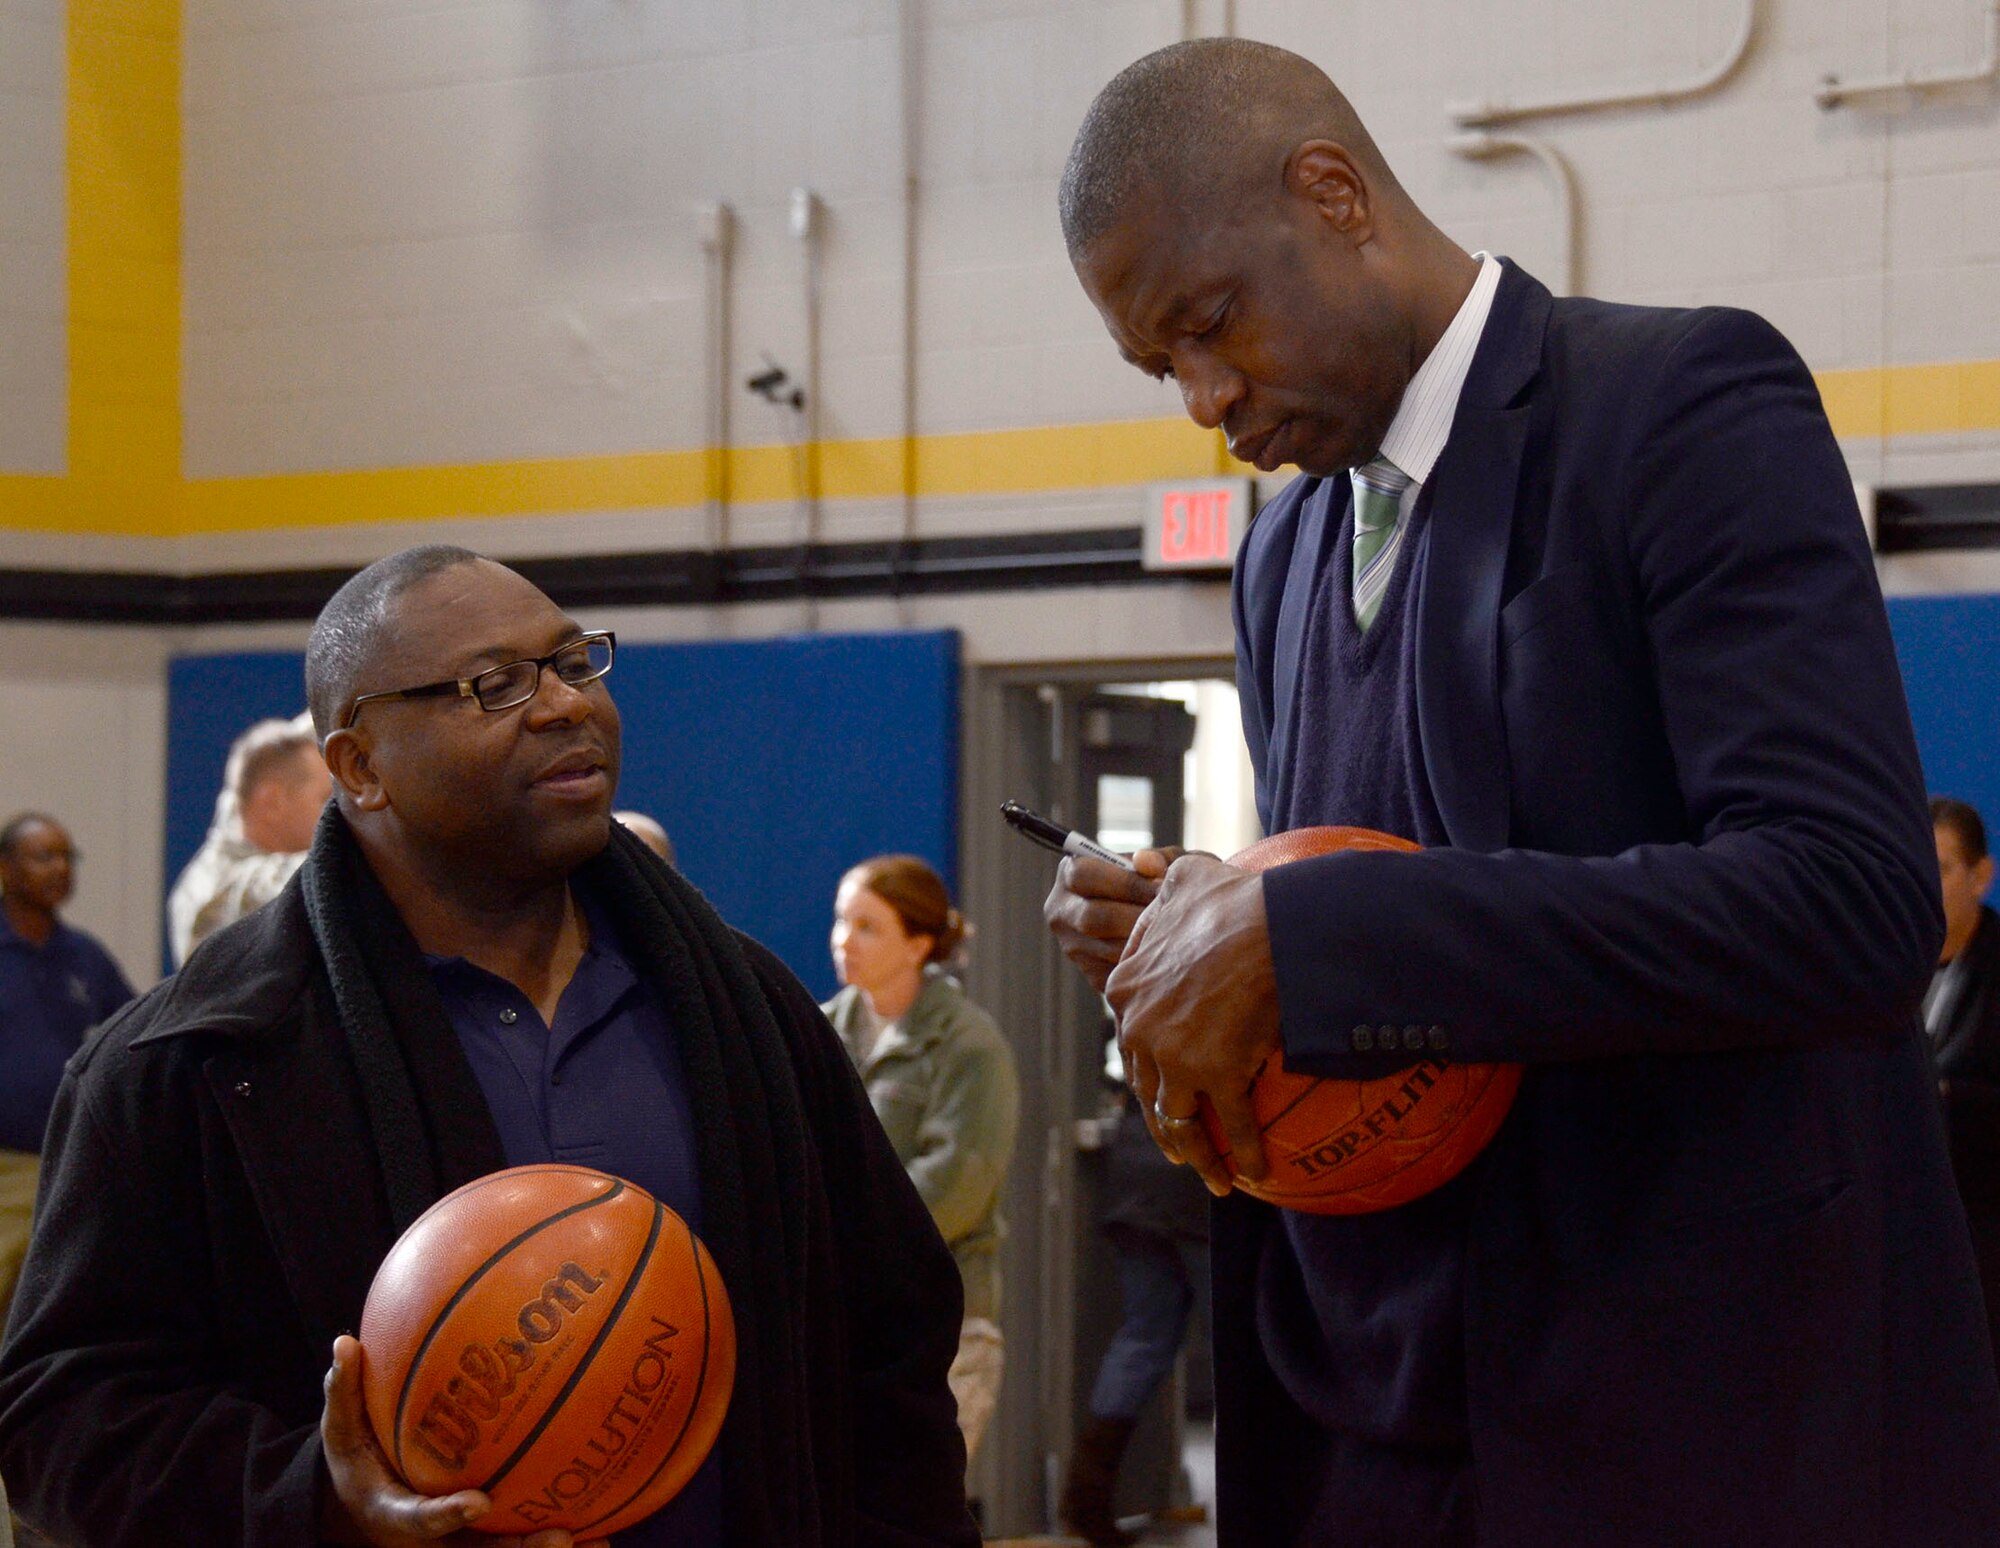 Dikembe Mutombo, NBA Hall of Famer, signs a basketball for a member of Team Dobbins at the grand opening of the renovated fitness center at Dobbins Air Reserve Base, Ga. Nov. 18, 2014. The fitness center includes approximately 30 new pieces of equipment. (U.S. Air Force photo by Don Peek/Released)